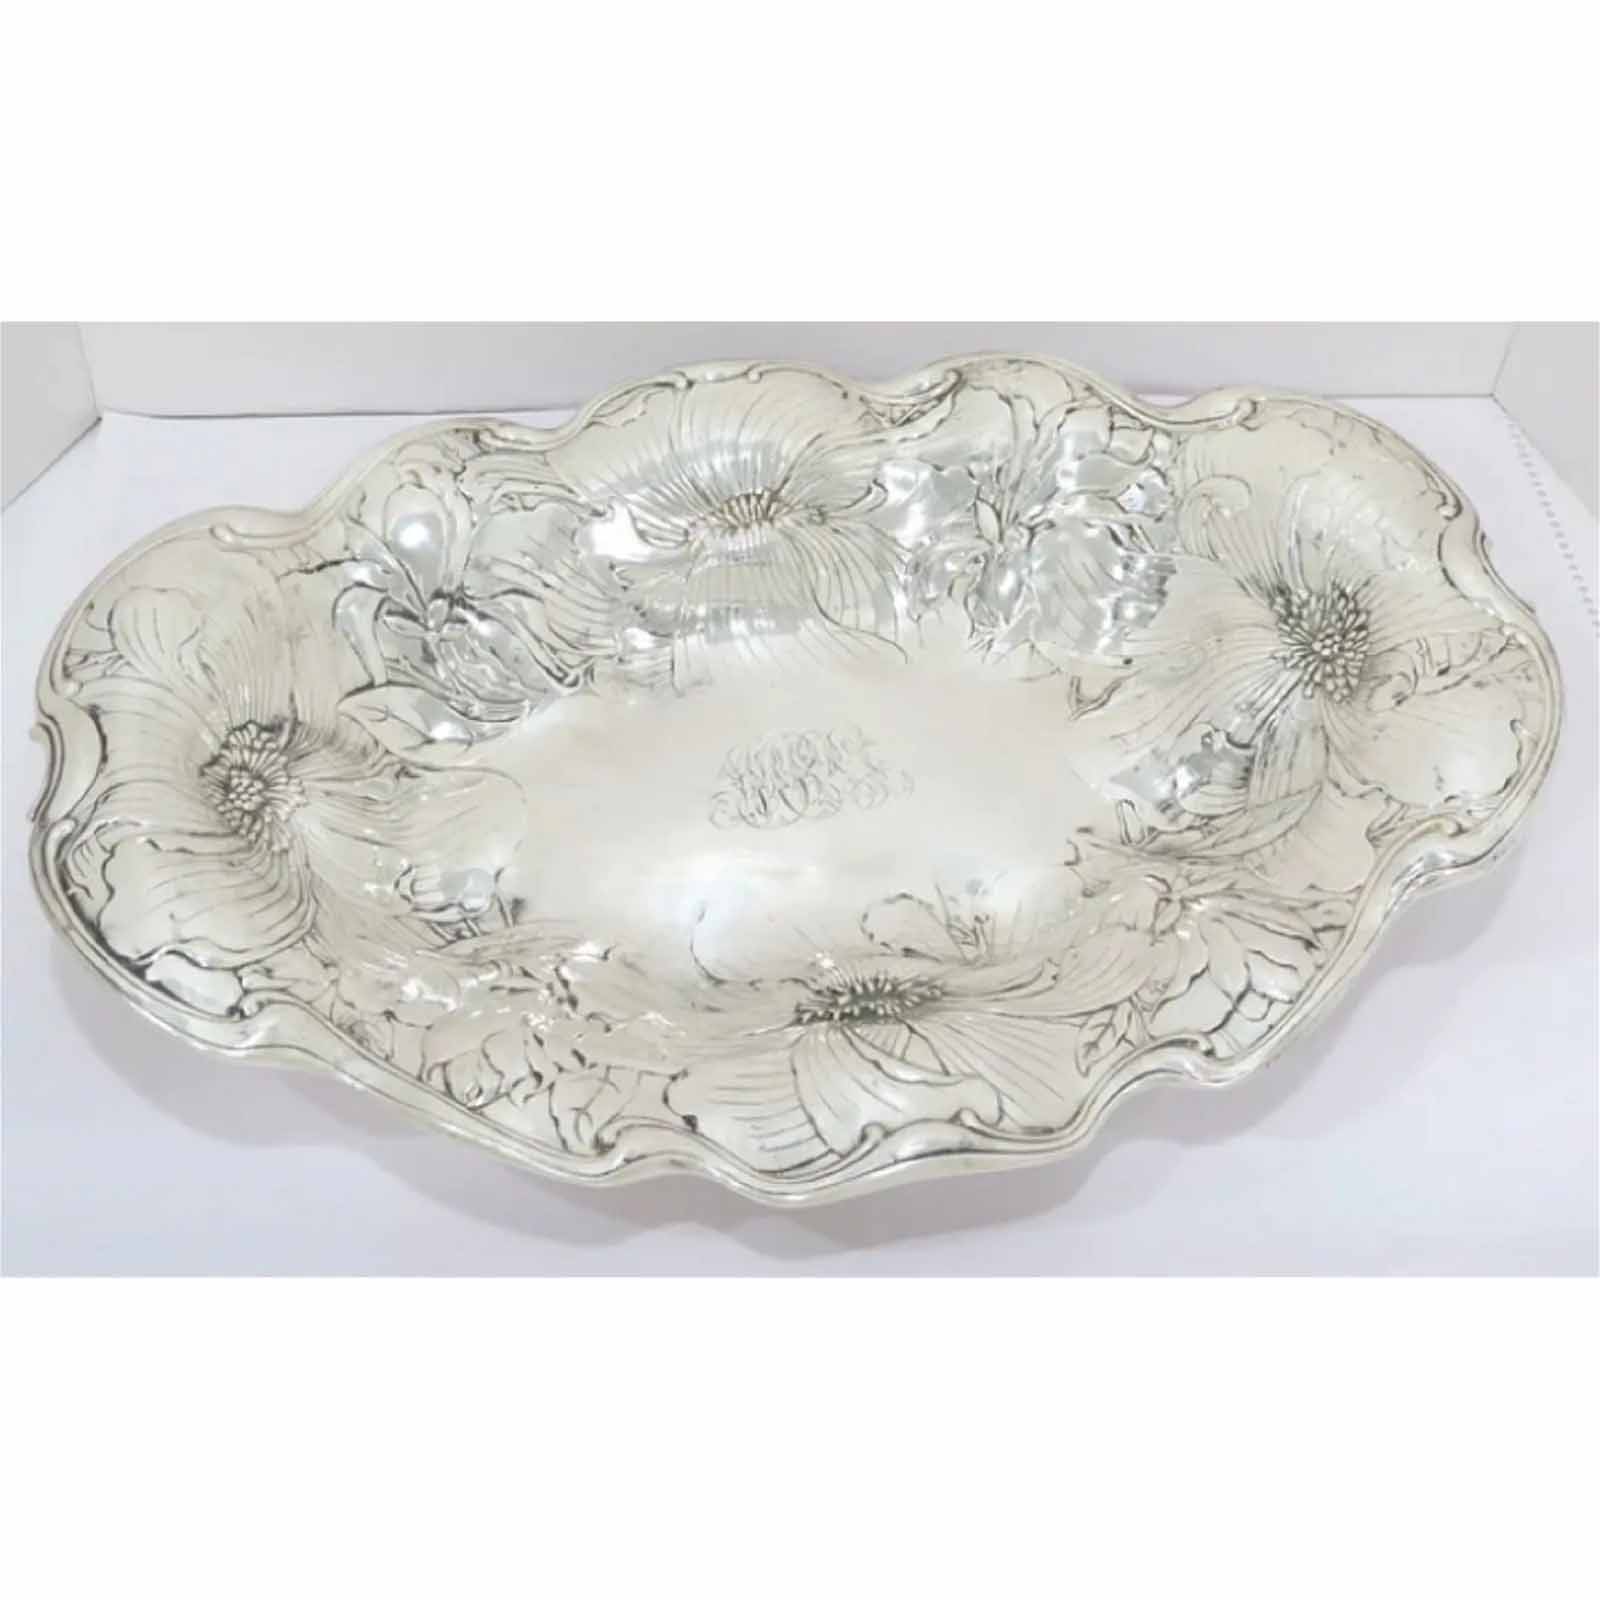 Gorham Sterling Silver Centerpiece Bowl, estimated at $3,800-$4,500 at SJ Auctioneers.